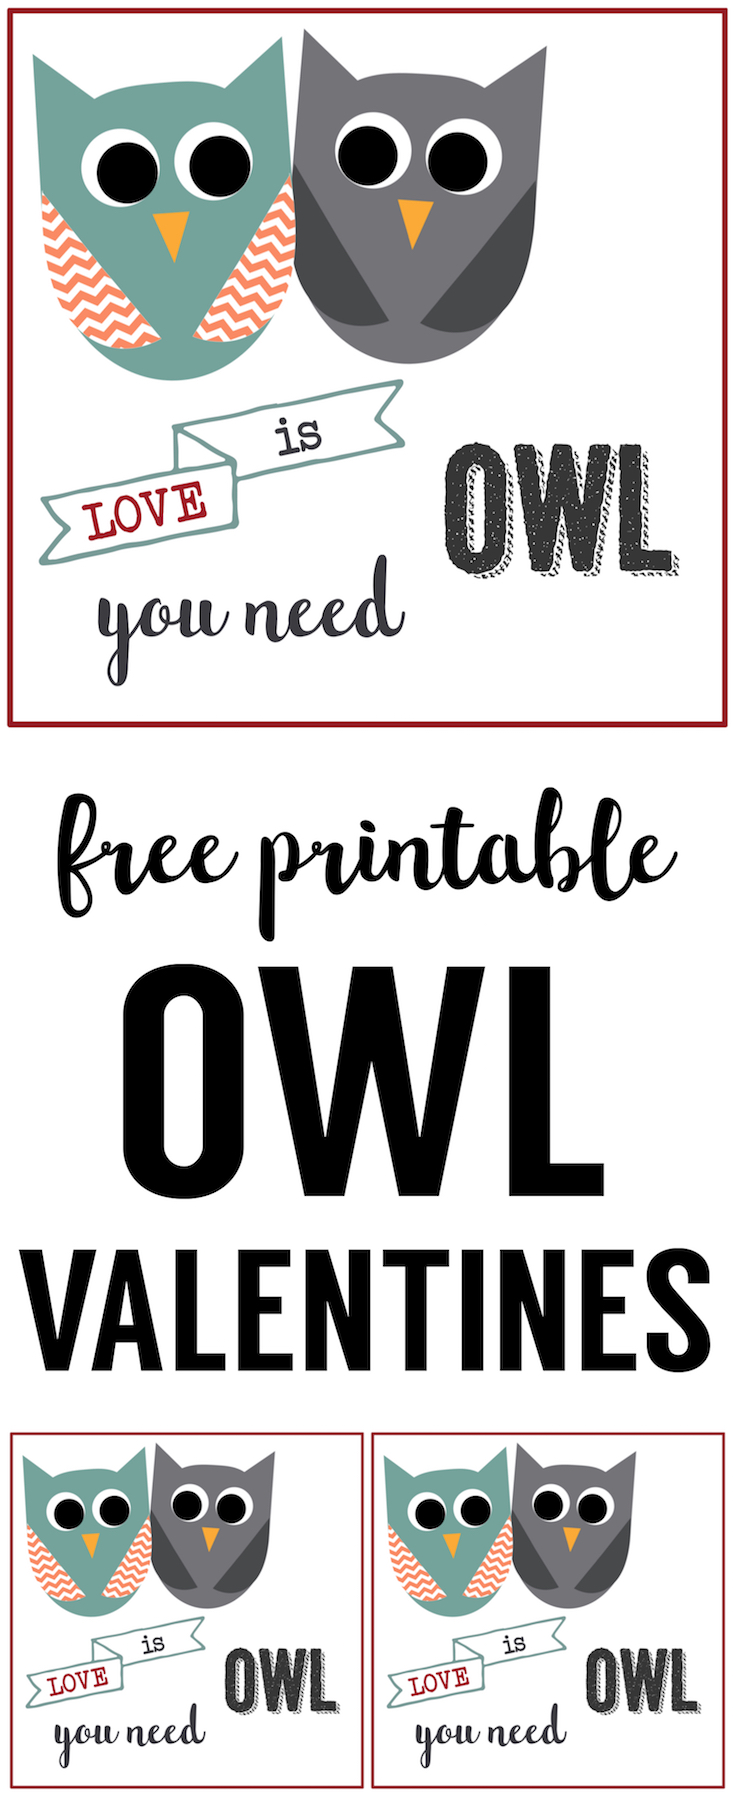 Free Printable Owl Valentine Cards. These free printable owl valentines are an easy DIY valentine to hand out. Owl you need is love valentine.